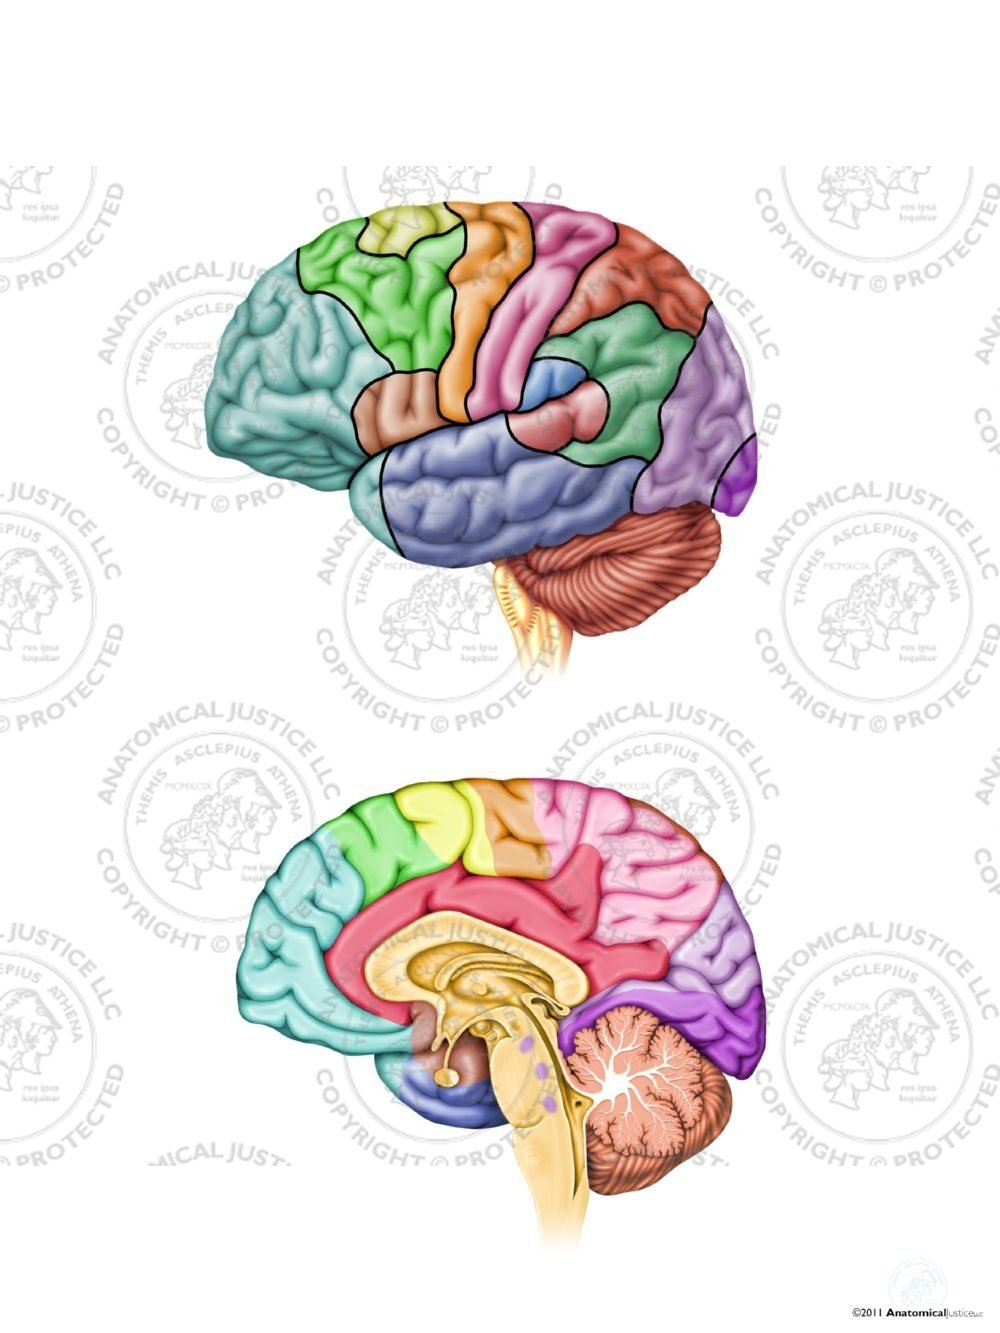 Anatomy and Functions of the Left Brain – No Text